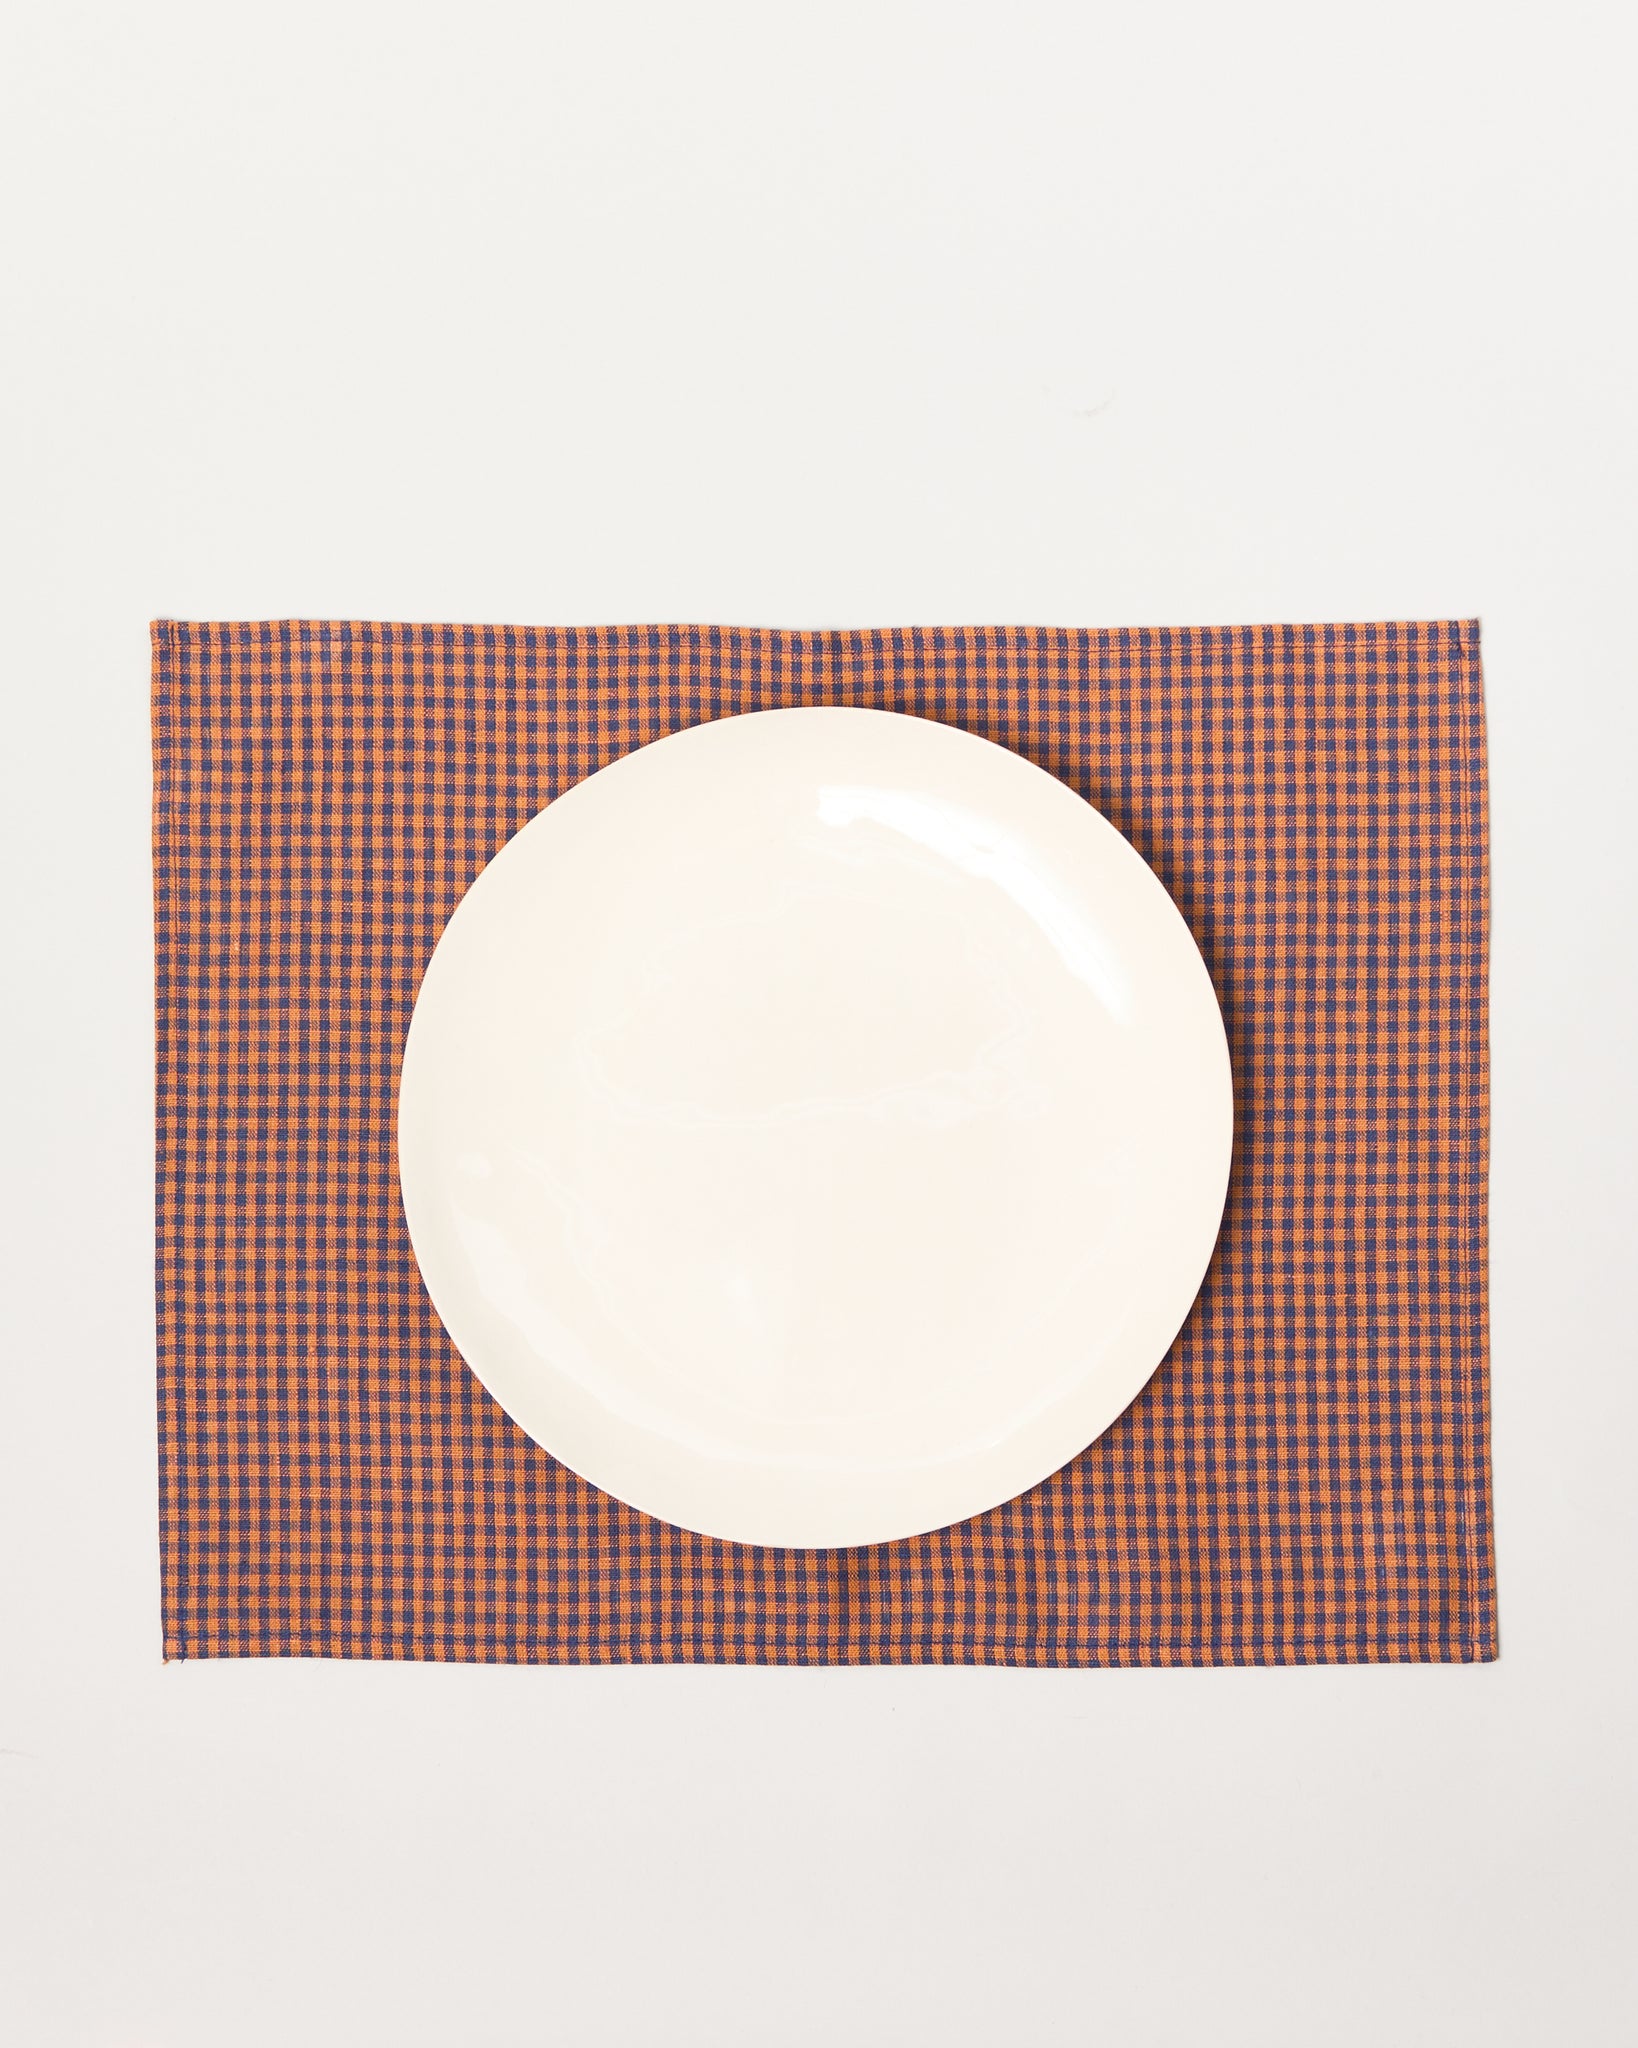 Linen Placemat in Blue and Orange Check, Set of 4